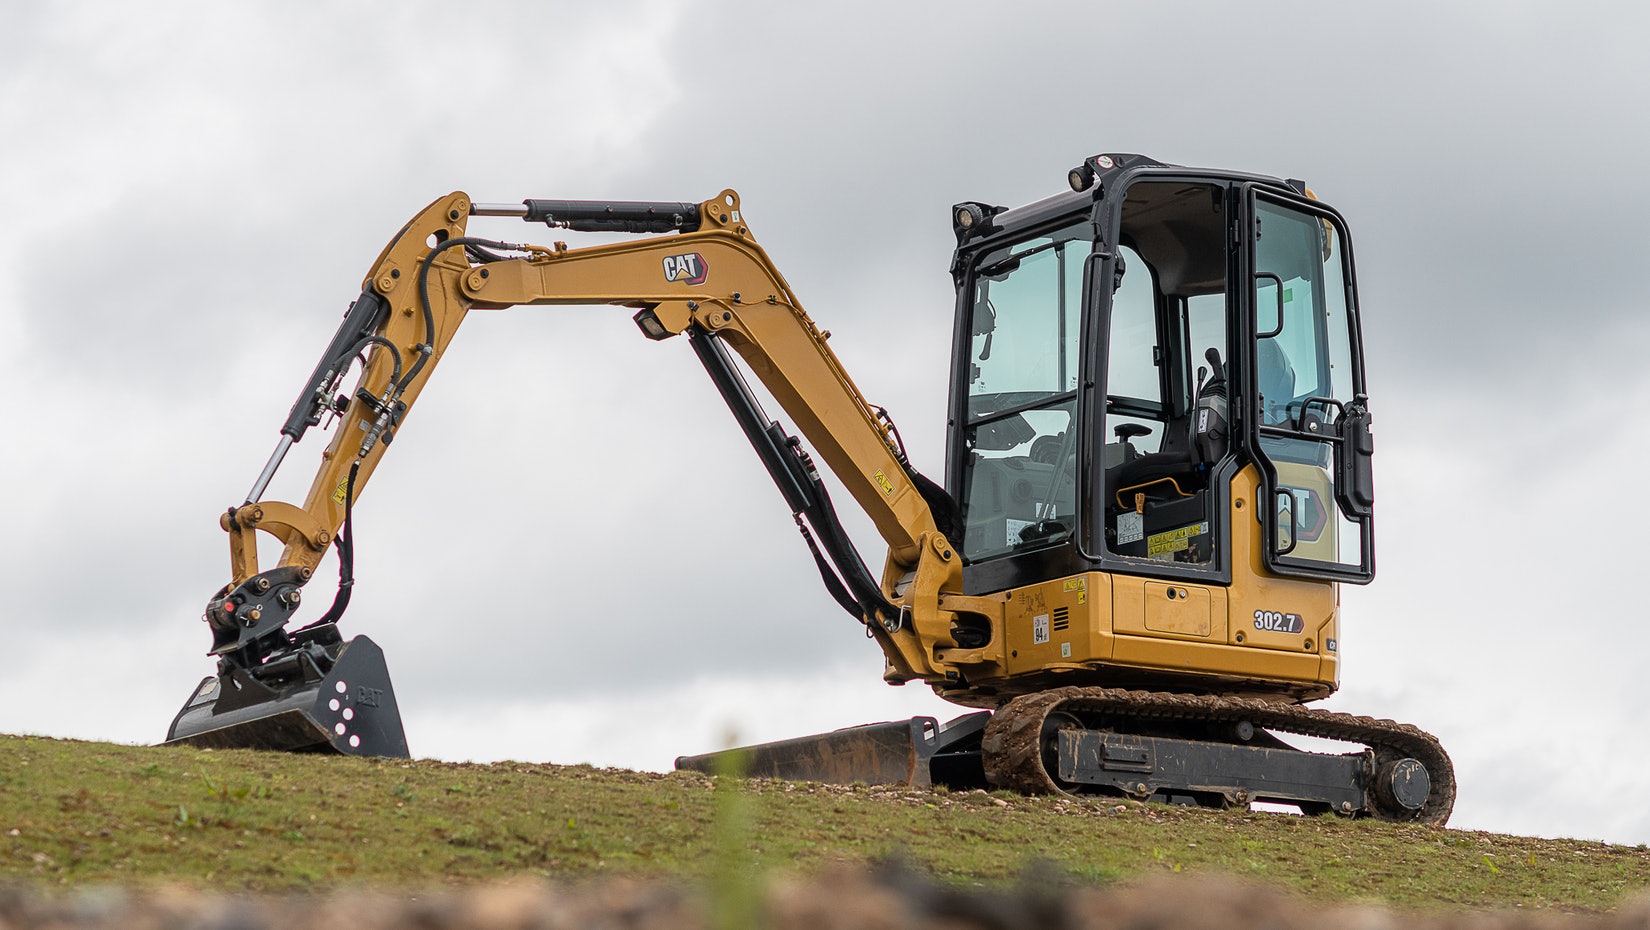 Caterpillar 302 7 Cr 303 Cr And 303 5 Cr Hydraulic Mini Excavators From Caterpillar Cat For Construction Pros